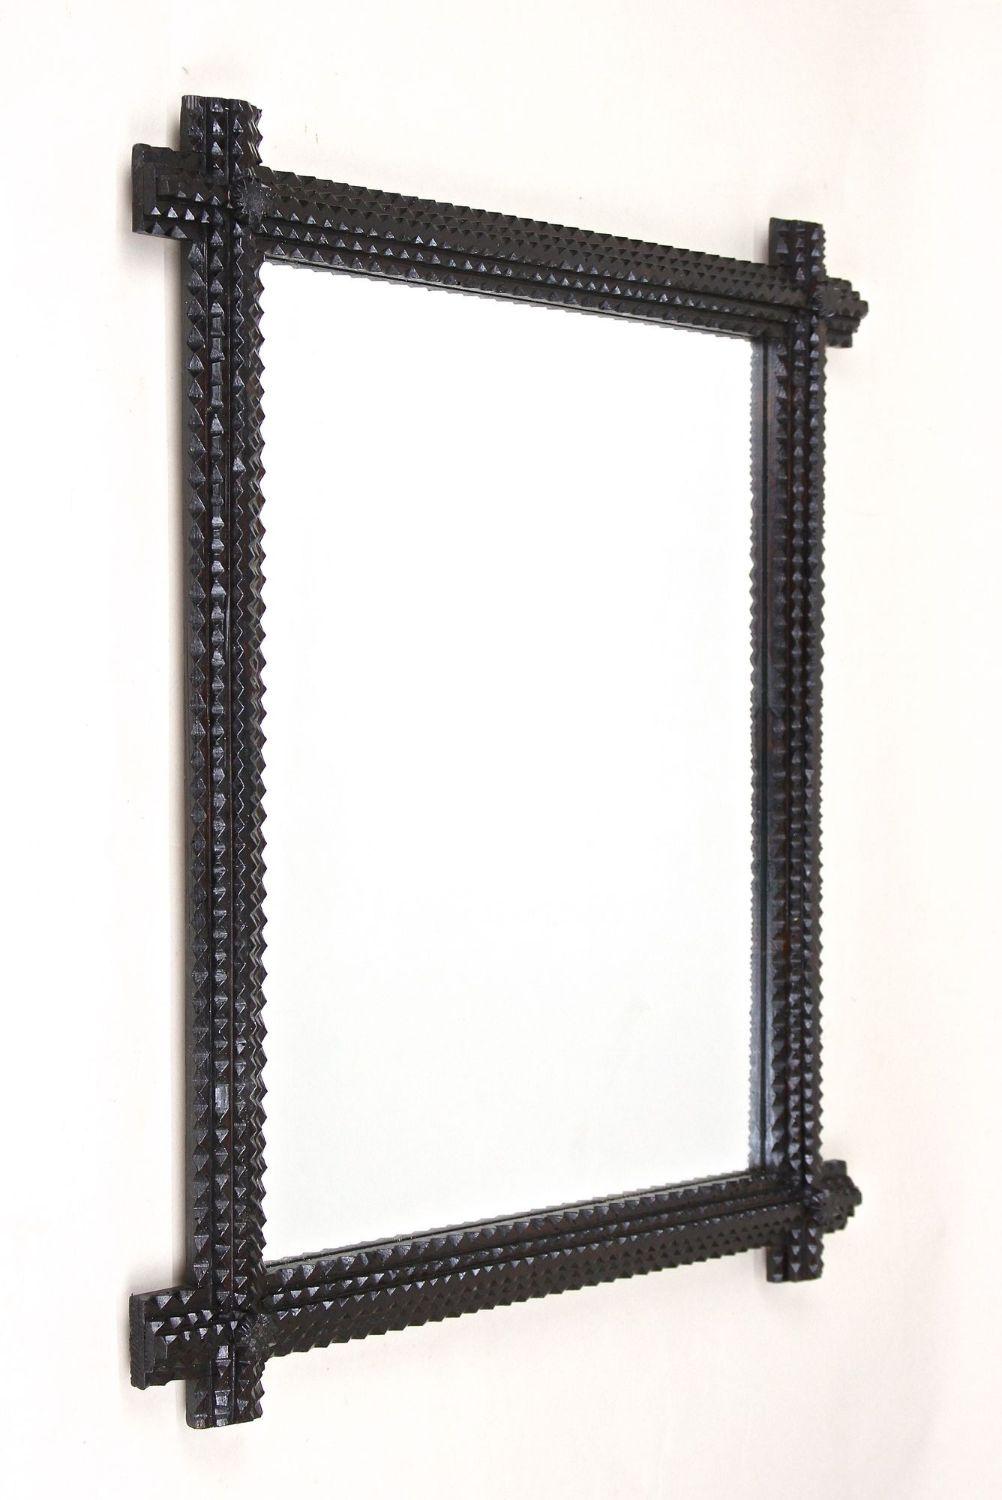 Delightful rustic Tramp Art wall mirror from the late 19th century in Austria around 1880. Elaborately hand carved out of basswood this over 140 year old Tramp Art mirror comes with a dark brown, almost black looking surface sealed with a nice semi